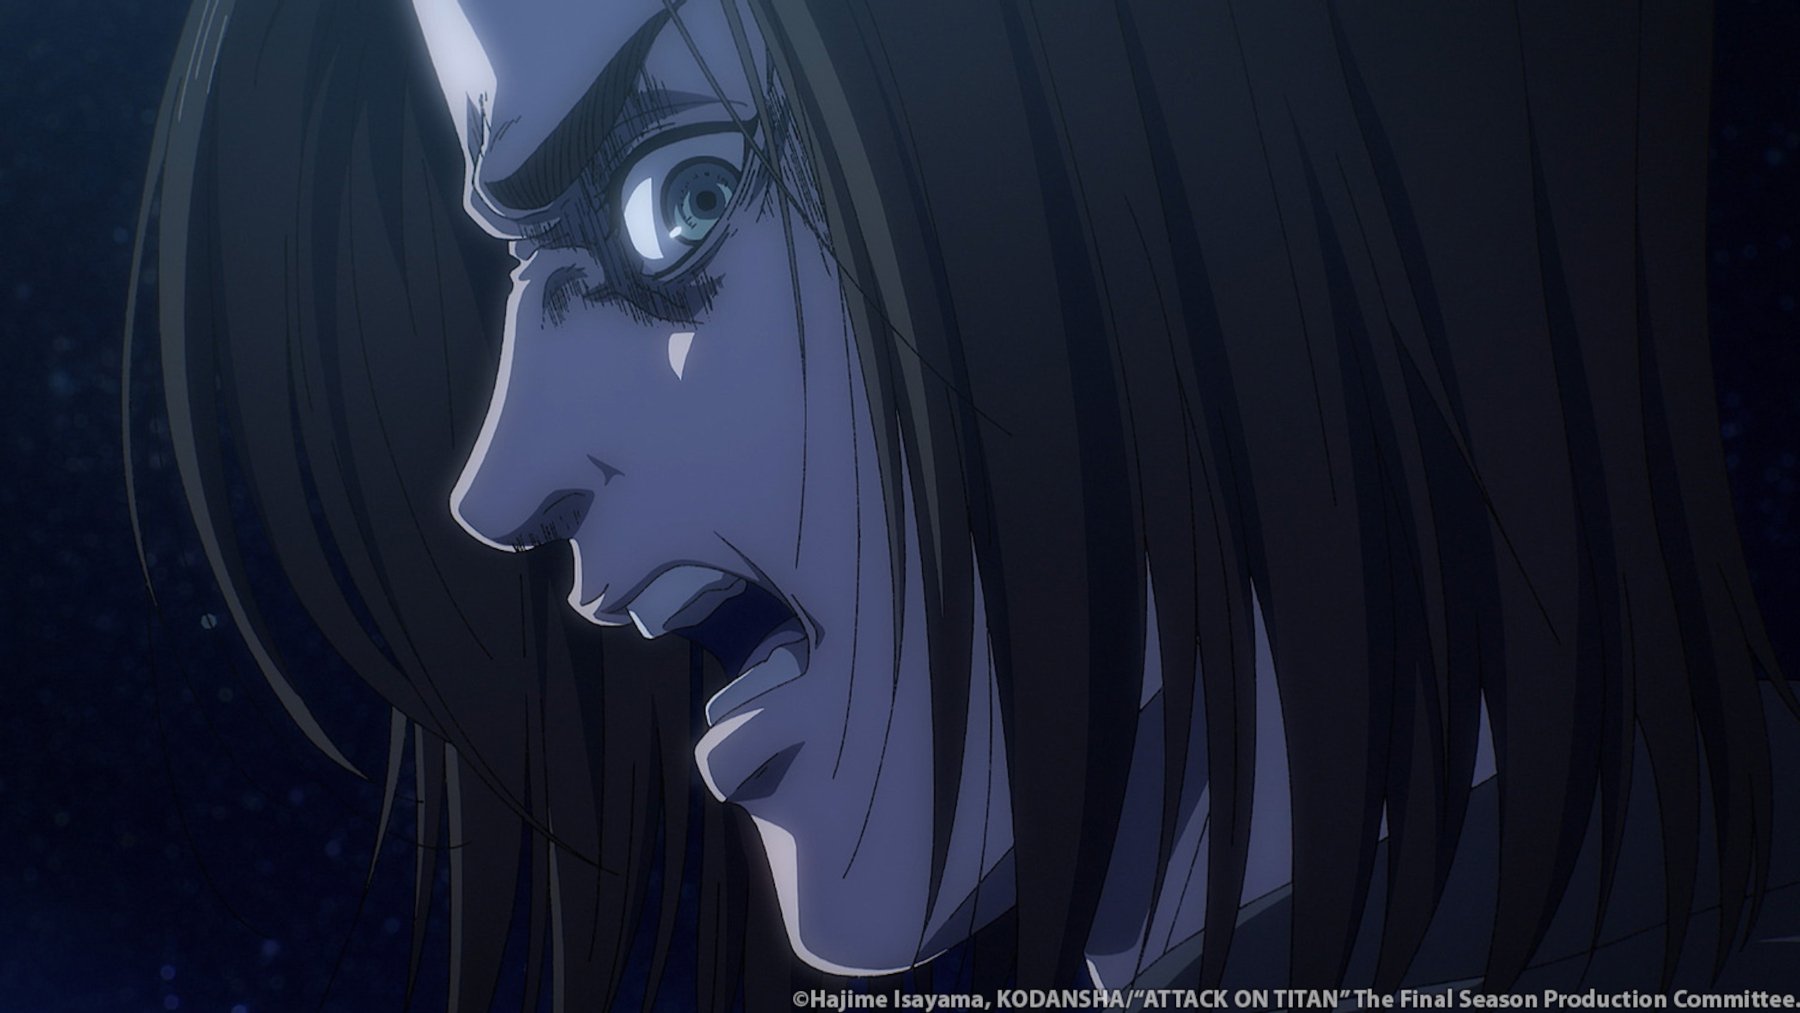 Eren Jaeger in 'Attack on Titan' Season 4 Part 2. The image shows a side profile of his face and he's angry and shouting.